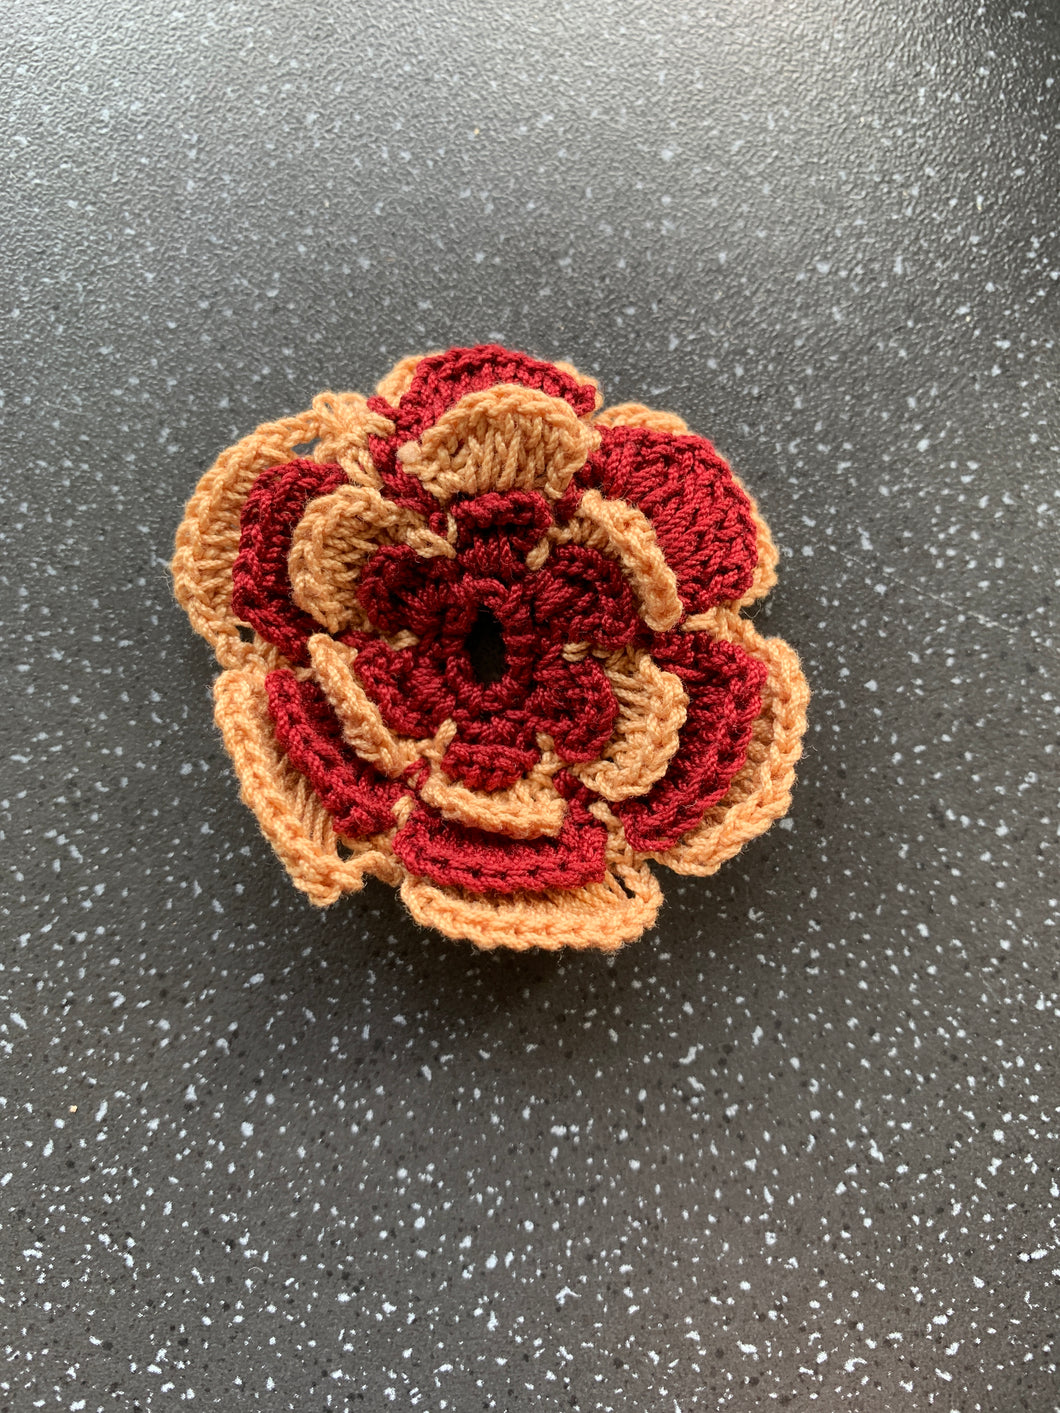 Manifest Love, Success, Wealth, Growth, Abundance, Happiness Intention Crochet Flower Red for under the pillow and wishes come true